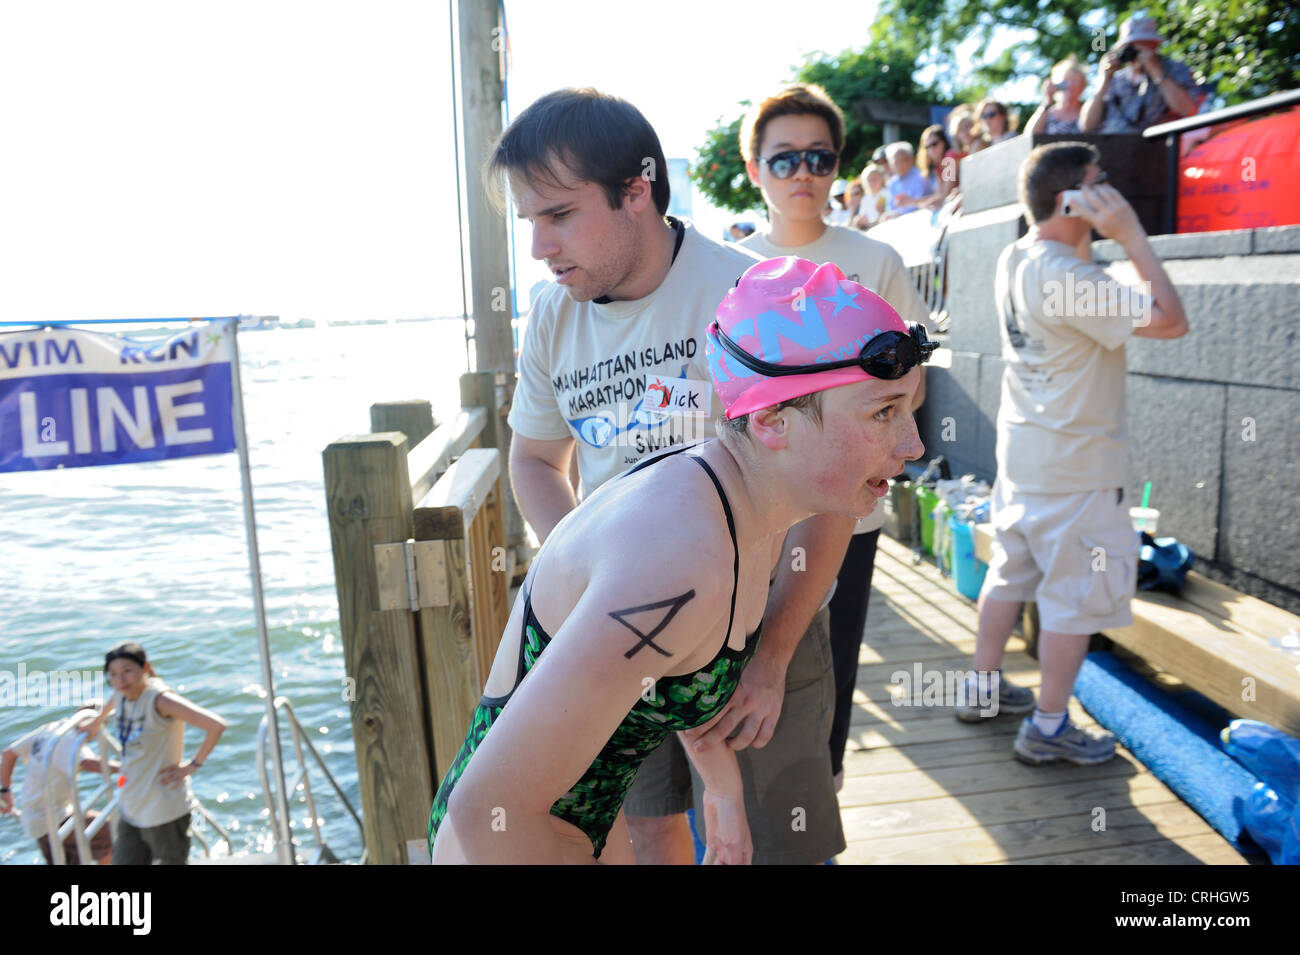 A swimmer after finishing a 28.5-mile circumnavigation of Manhattan, one of the premier open-water swimming events in the world. Stock Photo